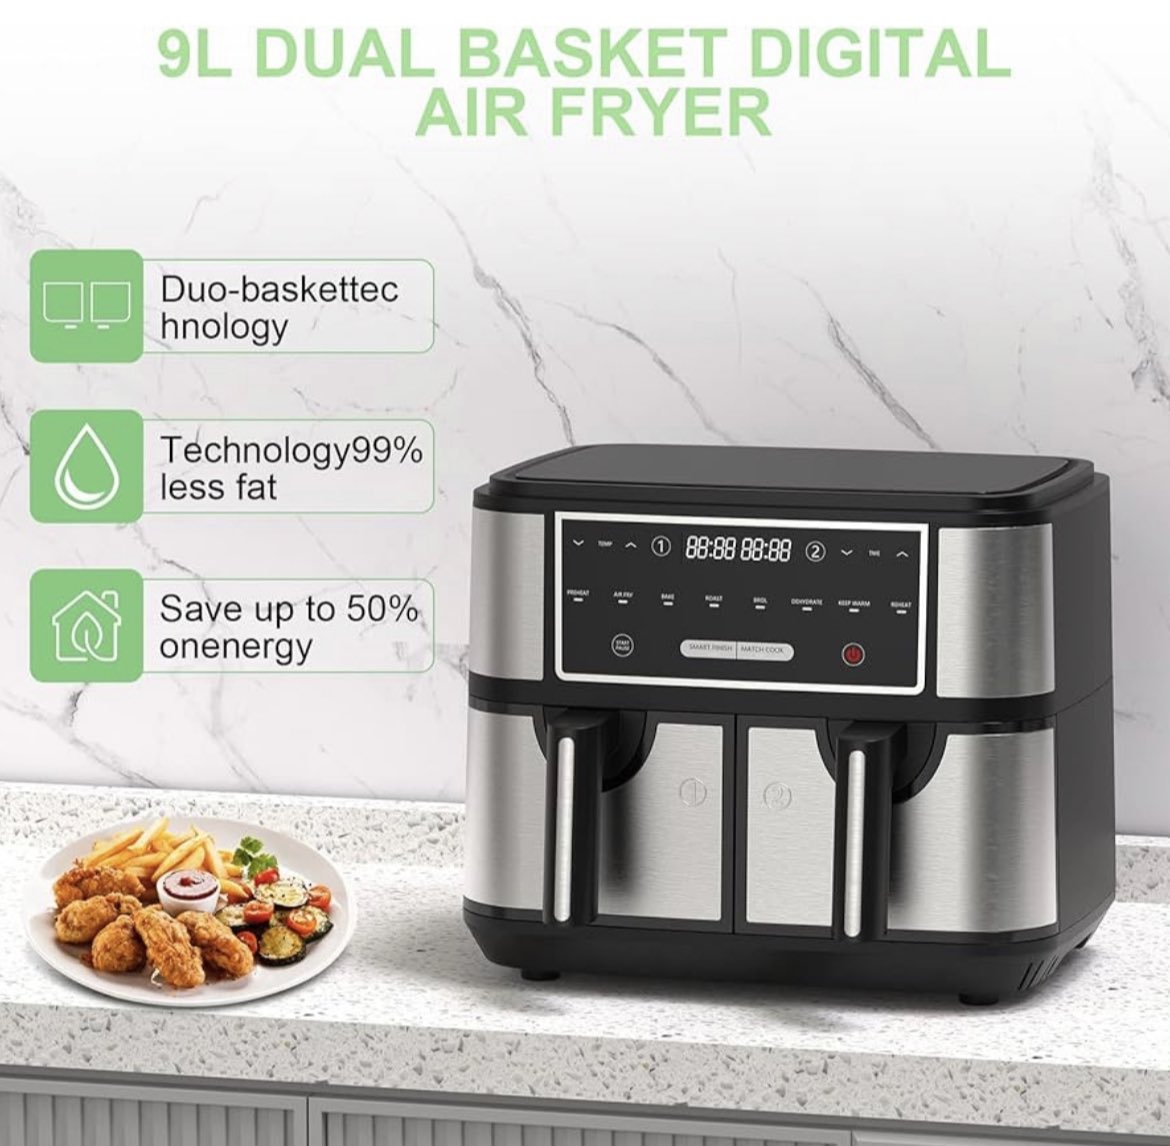 🚨 BARGAIN ALERT 🚨 This dual basket air fryer has great reviews and it’s ONLY £44.99 when you redeem code and apply voucher Check it out here ➡️ amazon.co.uk/dp/B0BQB4755K/… # ad